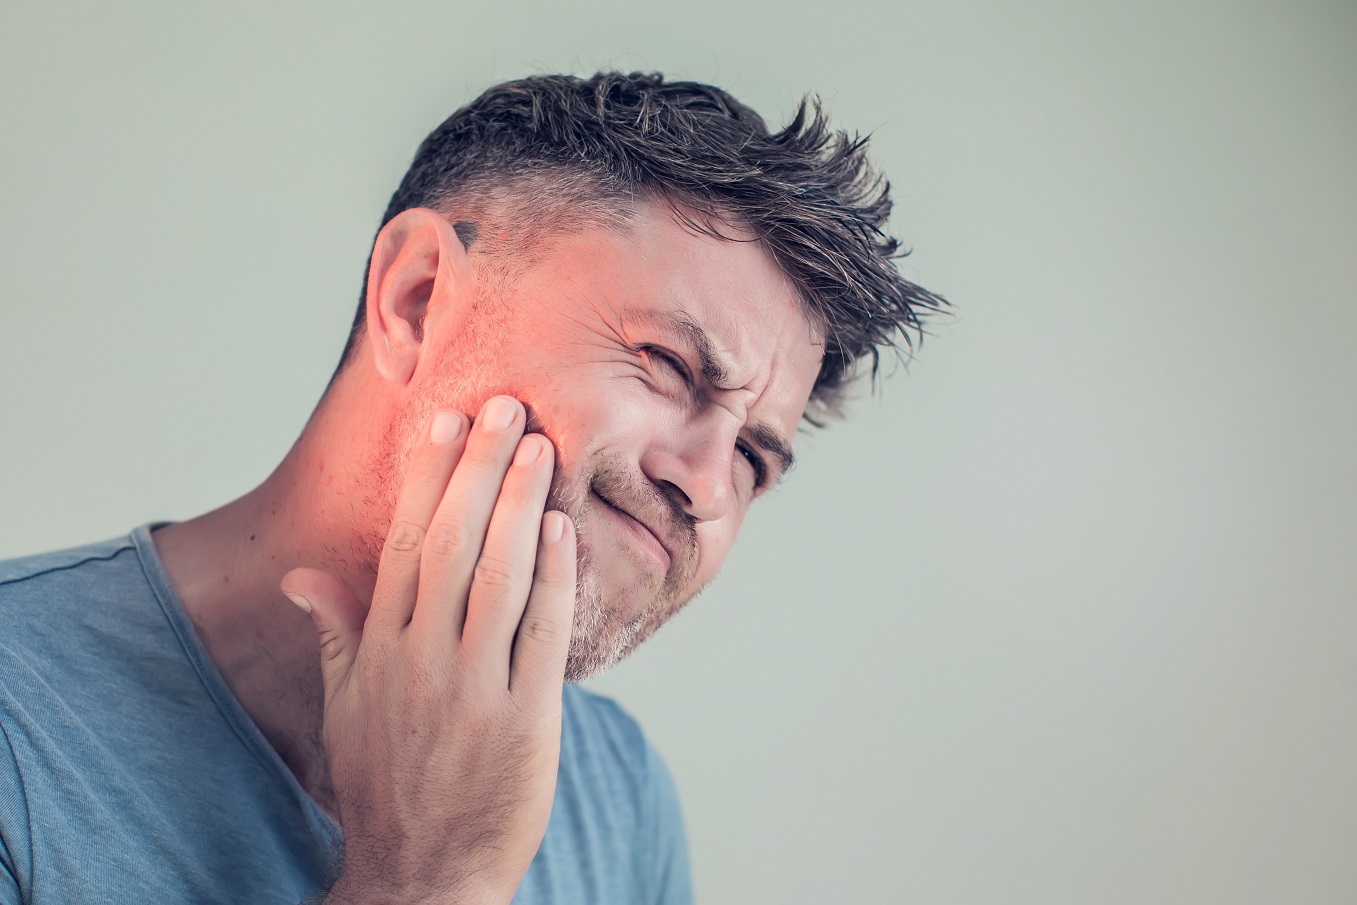 How To Treat Nerve Pain After Tooth Extraction